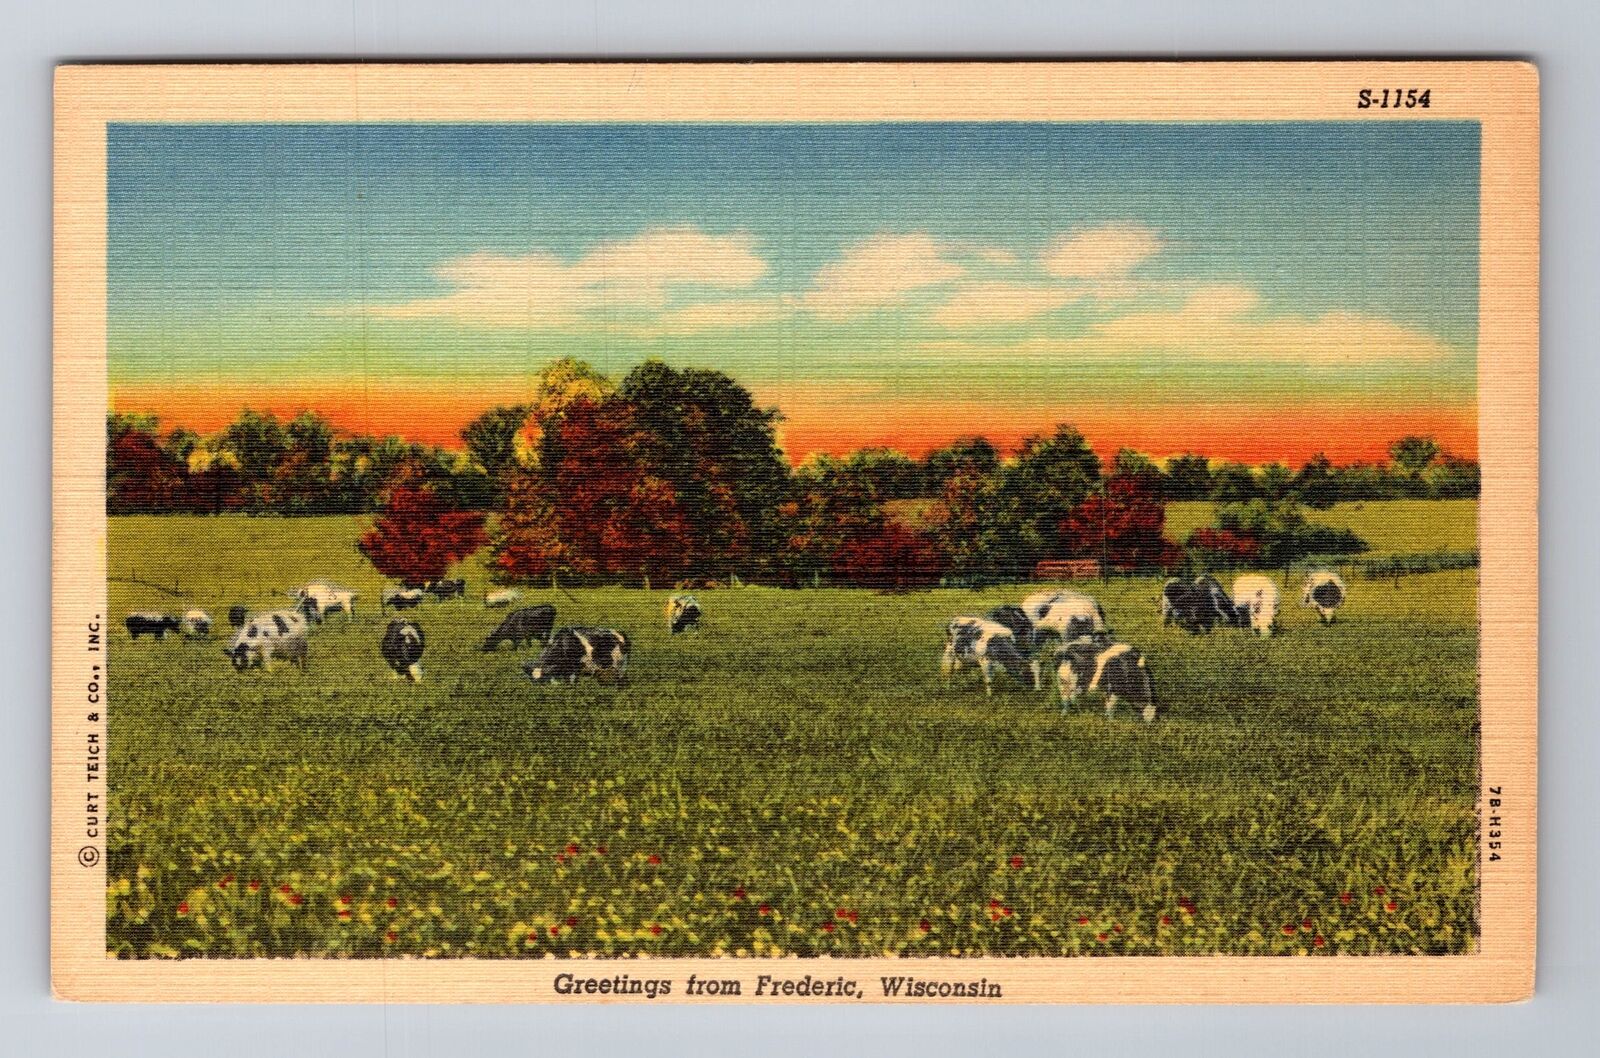 Frederic WI-Wisconsin, Scenic Greetings, Antique, Vintage Postcard